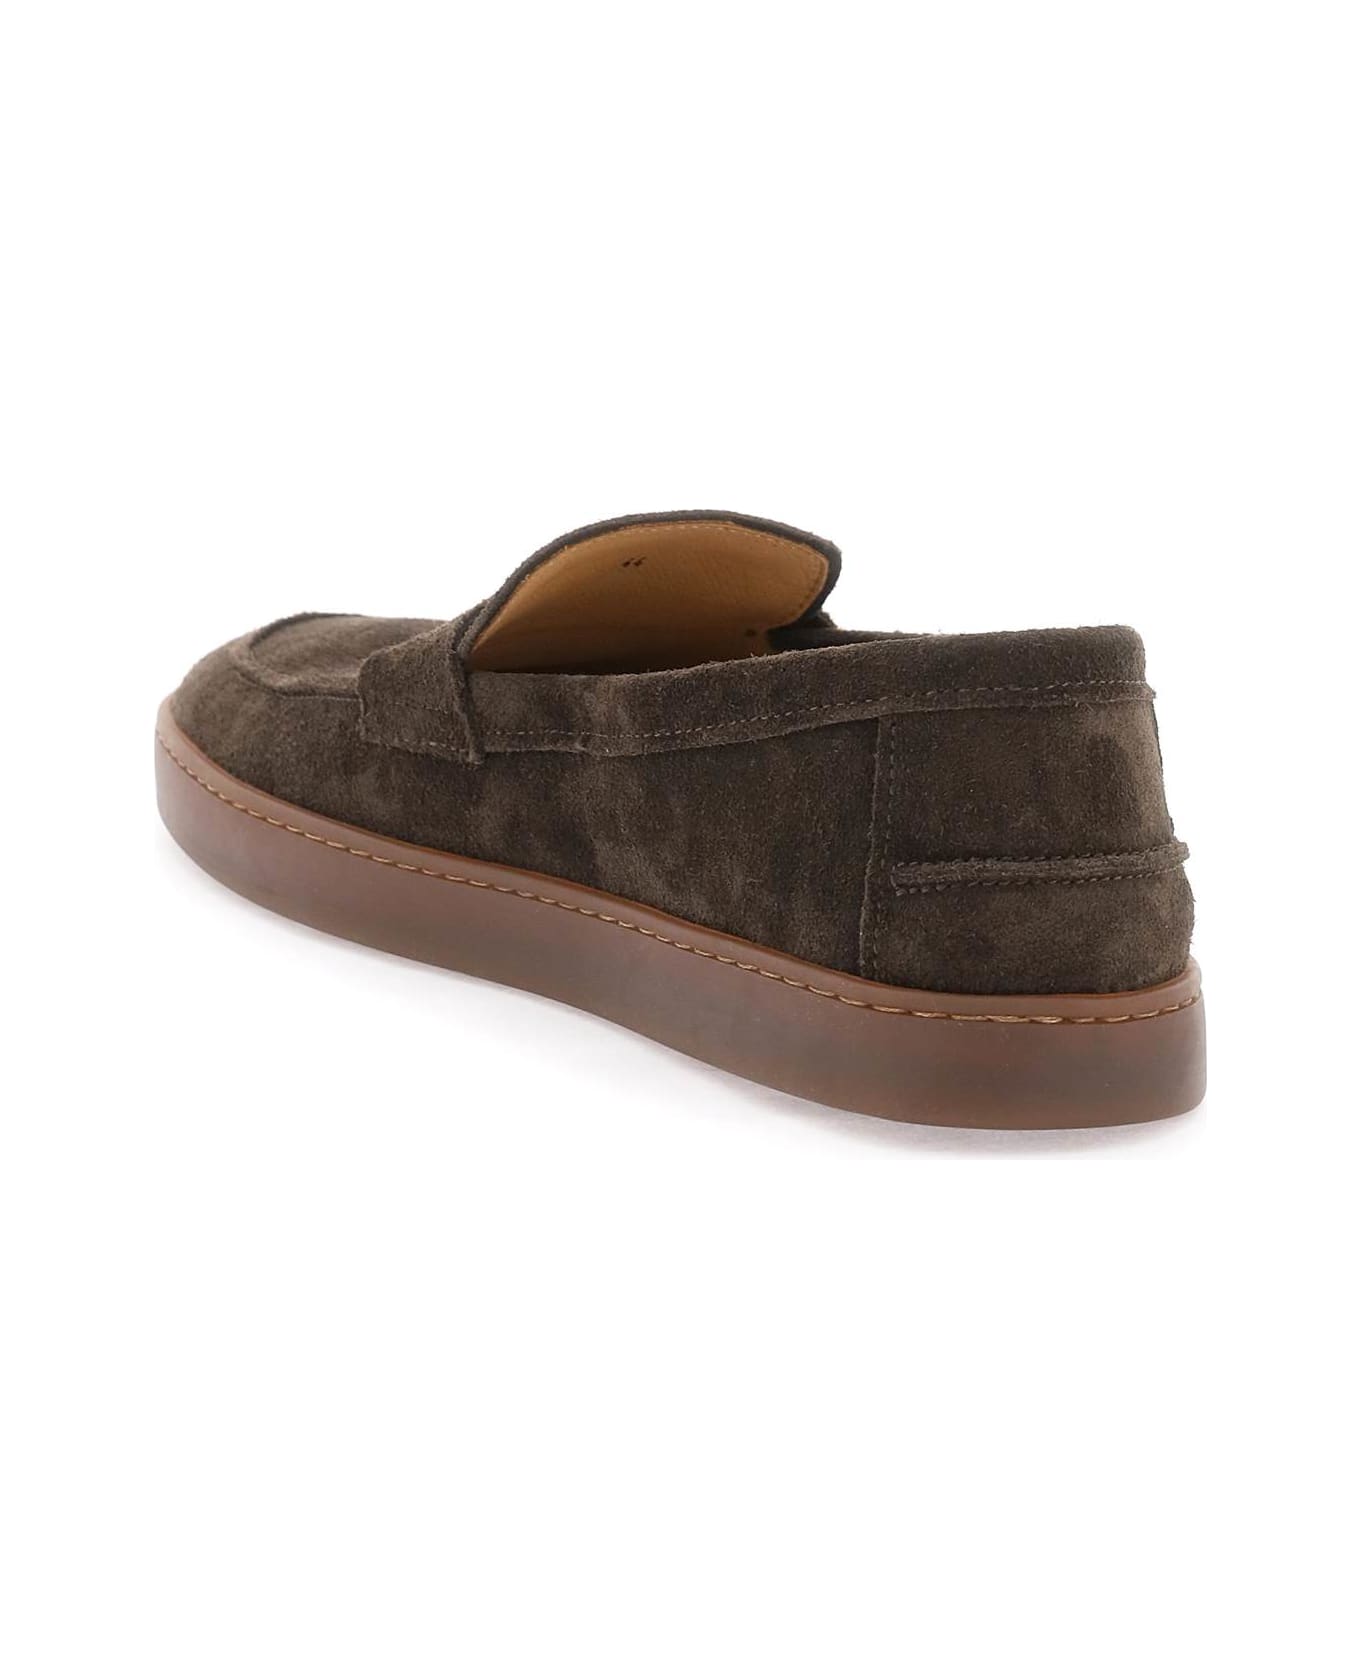 Henderson Baracco Suede Loafers - MODICA CLOUD (Brown)